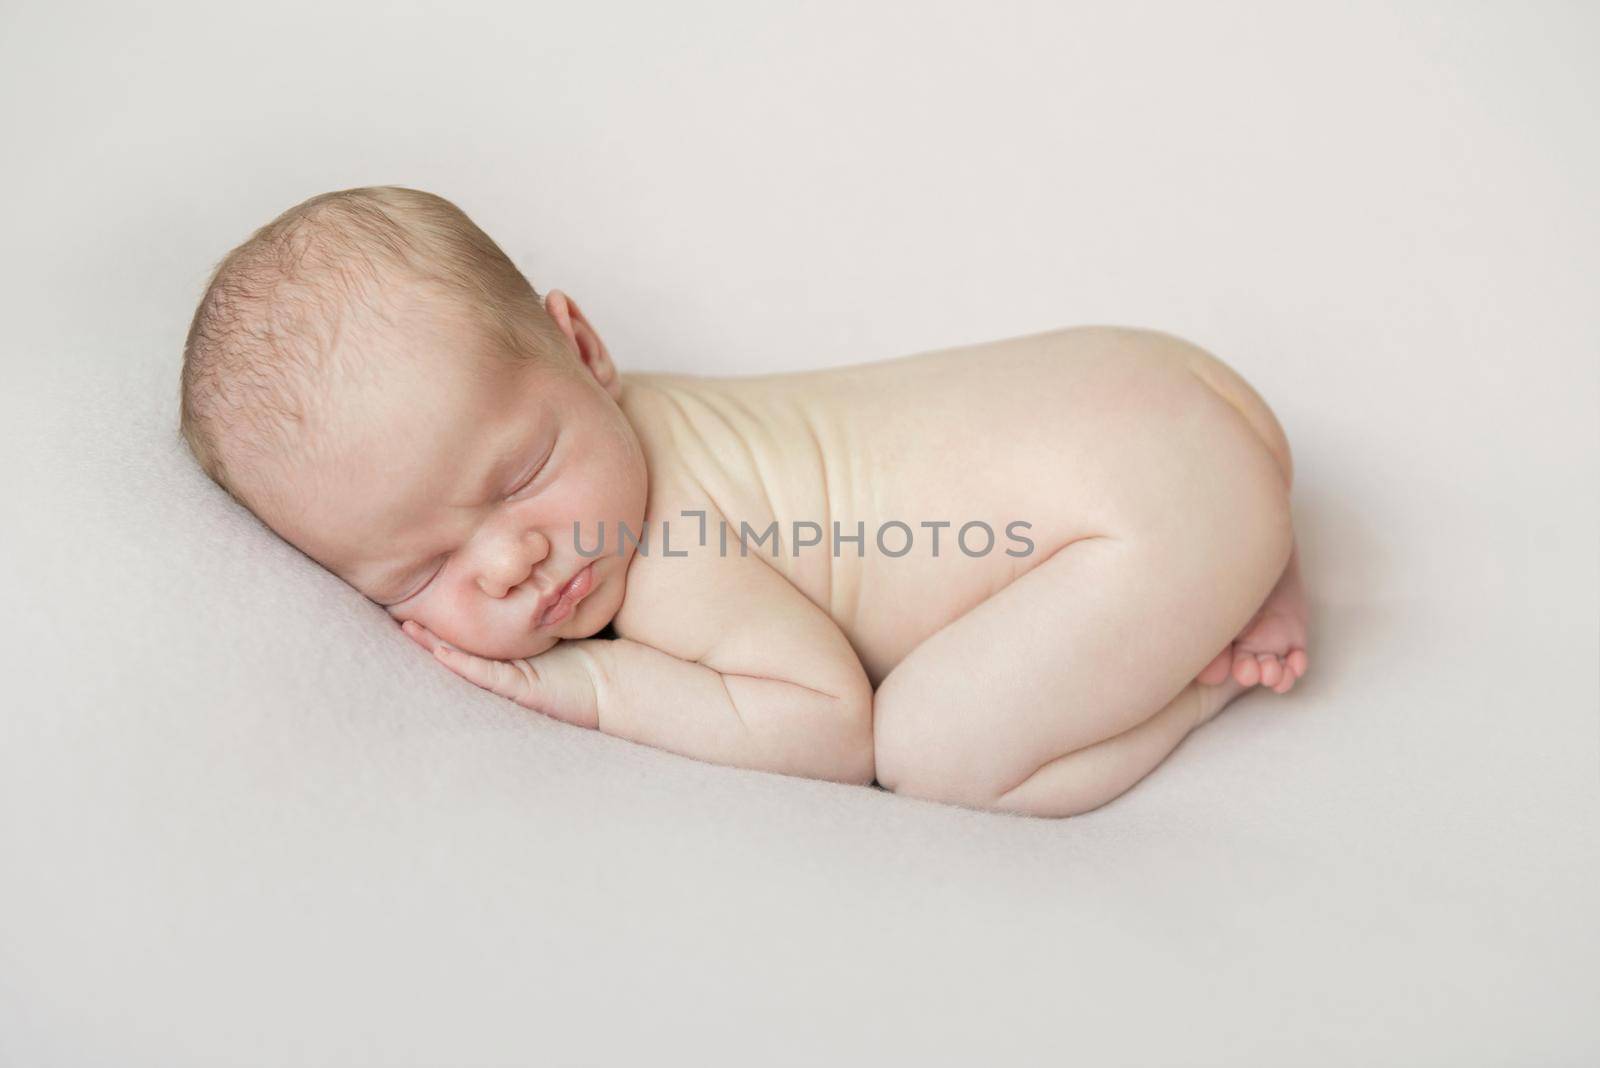 Adorable hairy naked baby napping on his belly, on a soft white blanket